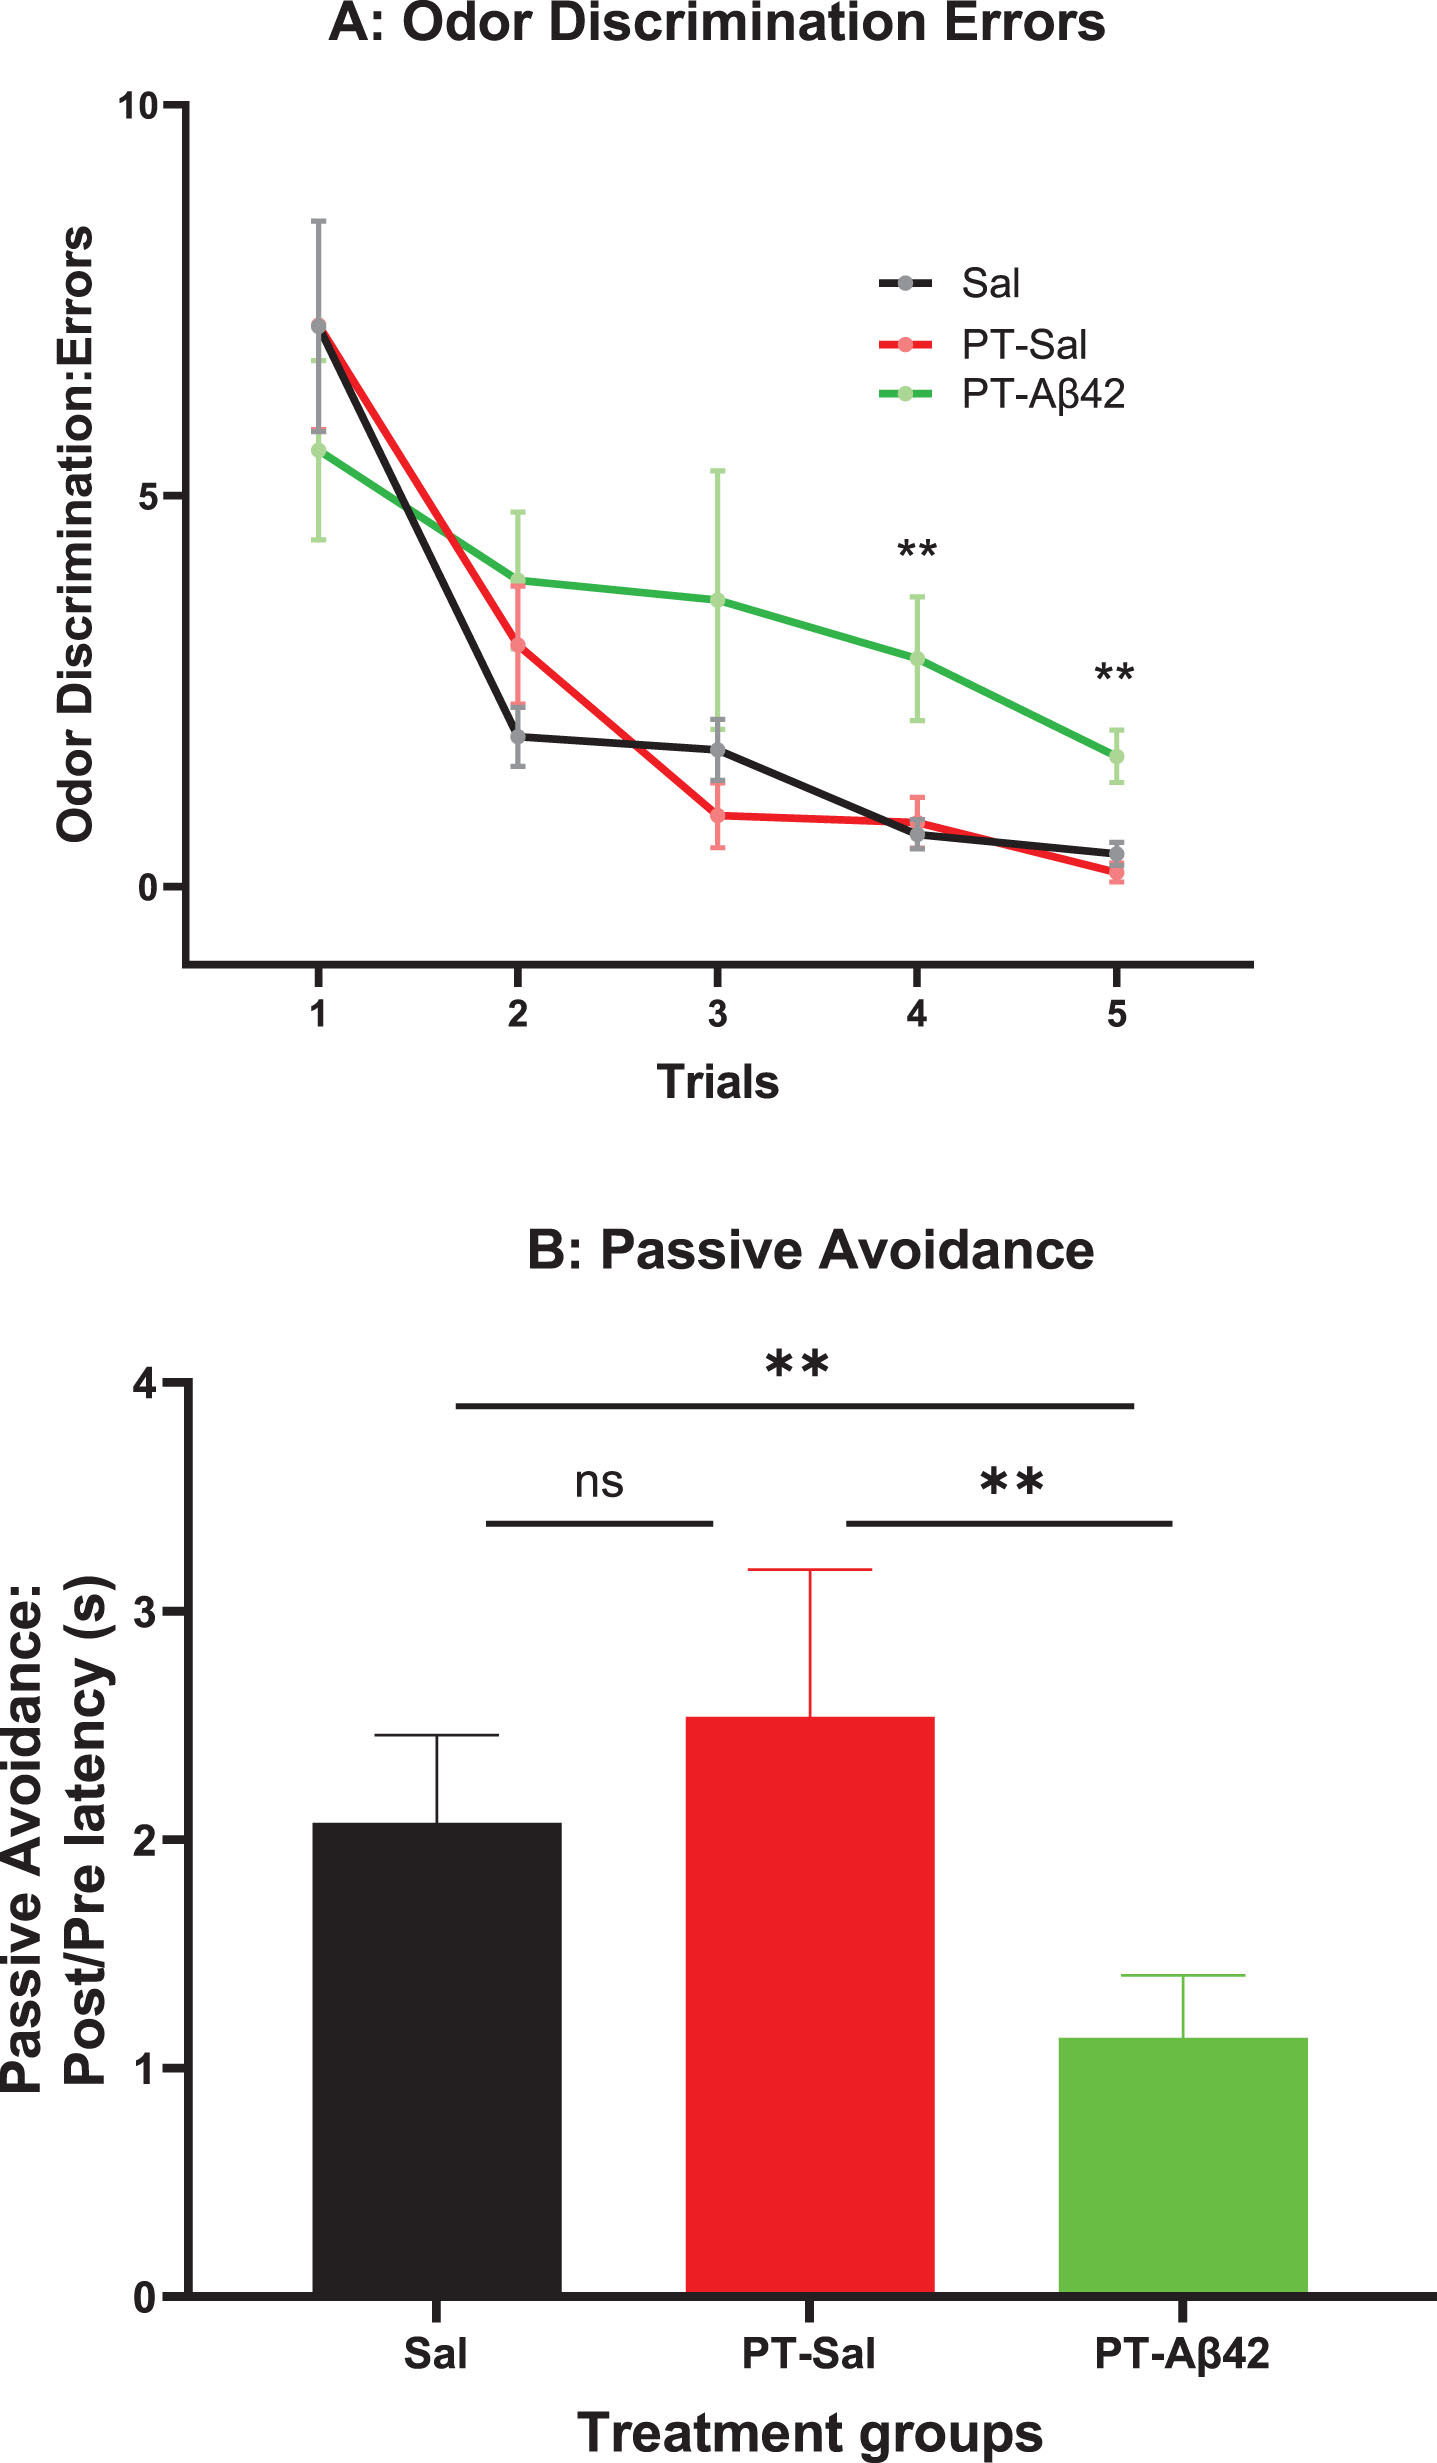 Mice treated with PT-Aβ42 (PT-Aβ42) showed deficits compared to PT-Sal and Sal-only mice. A) Odor Discrimination. Animals were trained to locate food in randomly assorted locations by using an odor cue. Mean errors to locate the target food cup for animals in each treatment group are shown. Brackets indicate standard error. Using a mixed effects analysis, we did not find any significant difference between the treatment groups across trials 1 through 3; however, when trials 4 and 5 were compared, a statistically significant difference (p < 0.01) was observed in the PT-Aβ42-treated mice compared to the other groups. B) Passive Avoidance: Post/Pre-Latency(s). Upon stepping from a safe platform, animals were exposed to a bright light, loud noise, and vibration. The mean ratio of post-training to pre-training step-down latencies was calculated for each animal and served to index learning. Brackets indicate standard errors, and the values were analyzed using the Mann-Whitney test. Animals treated with PT-Aβ42 showed a significantly lower step-down latency compared to the Sal group (PT-Sal, p < 0.01). Likewise, the PT-Aβ42 group demonstrated significantly lower step-down latency compared to PT-Sal group (p < 0.01). The PT-Sal and Sal-only groups failed to demonstrate any significant differences.